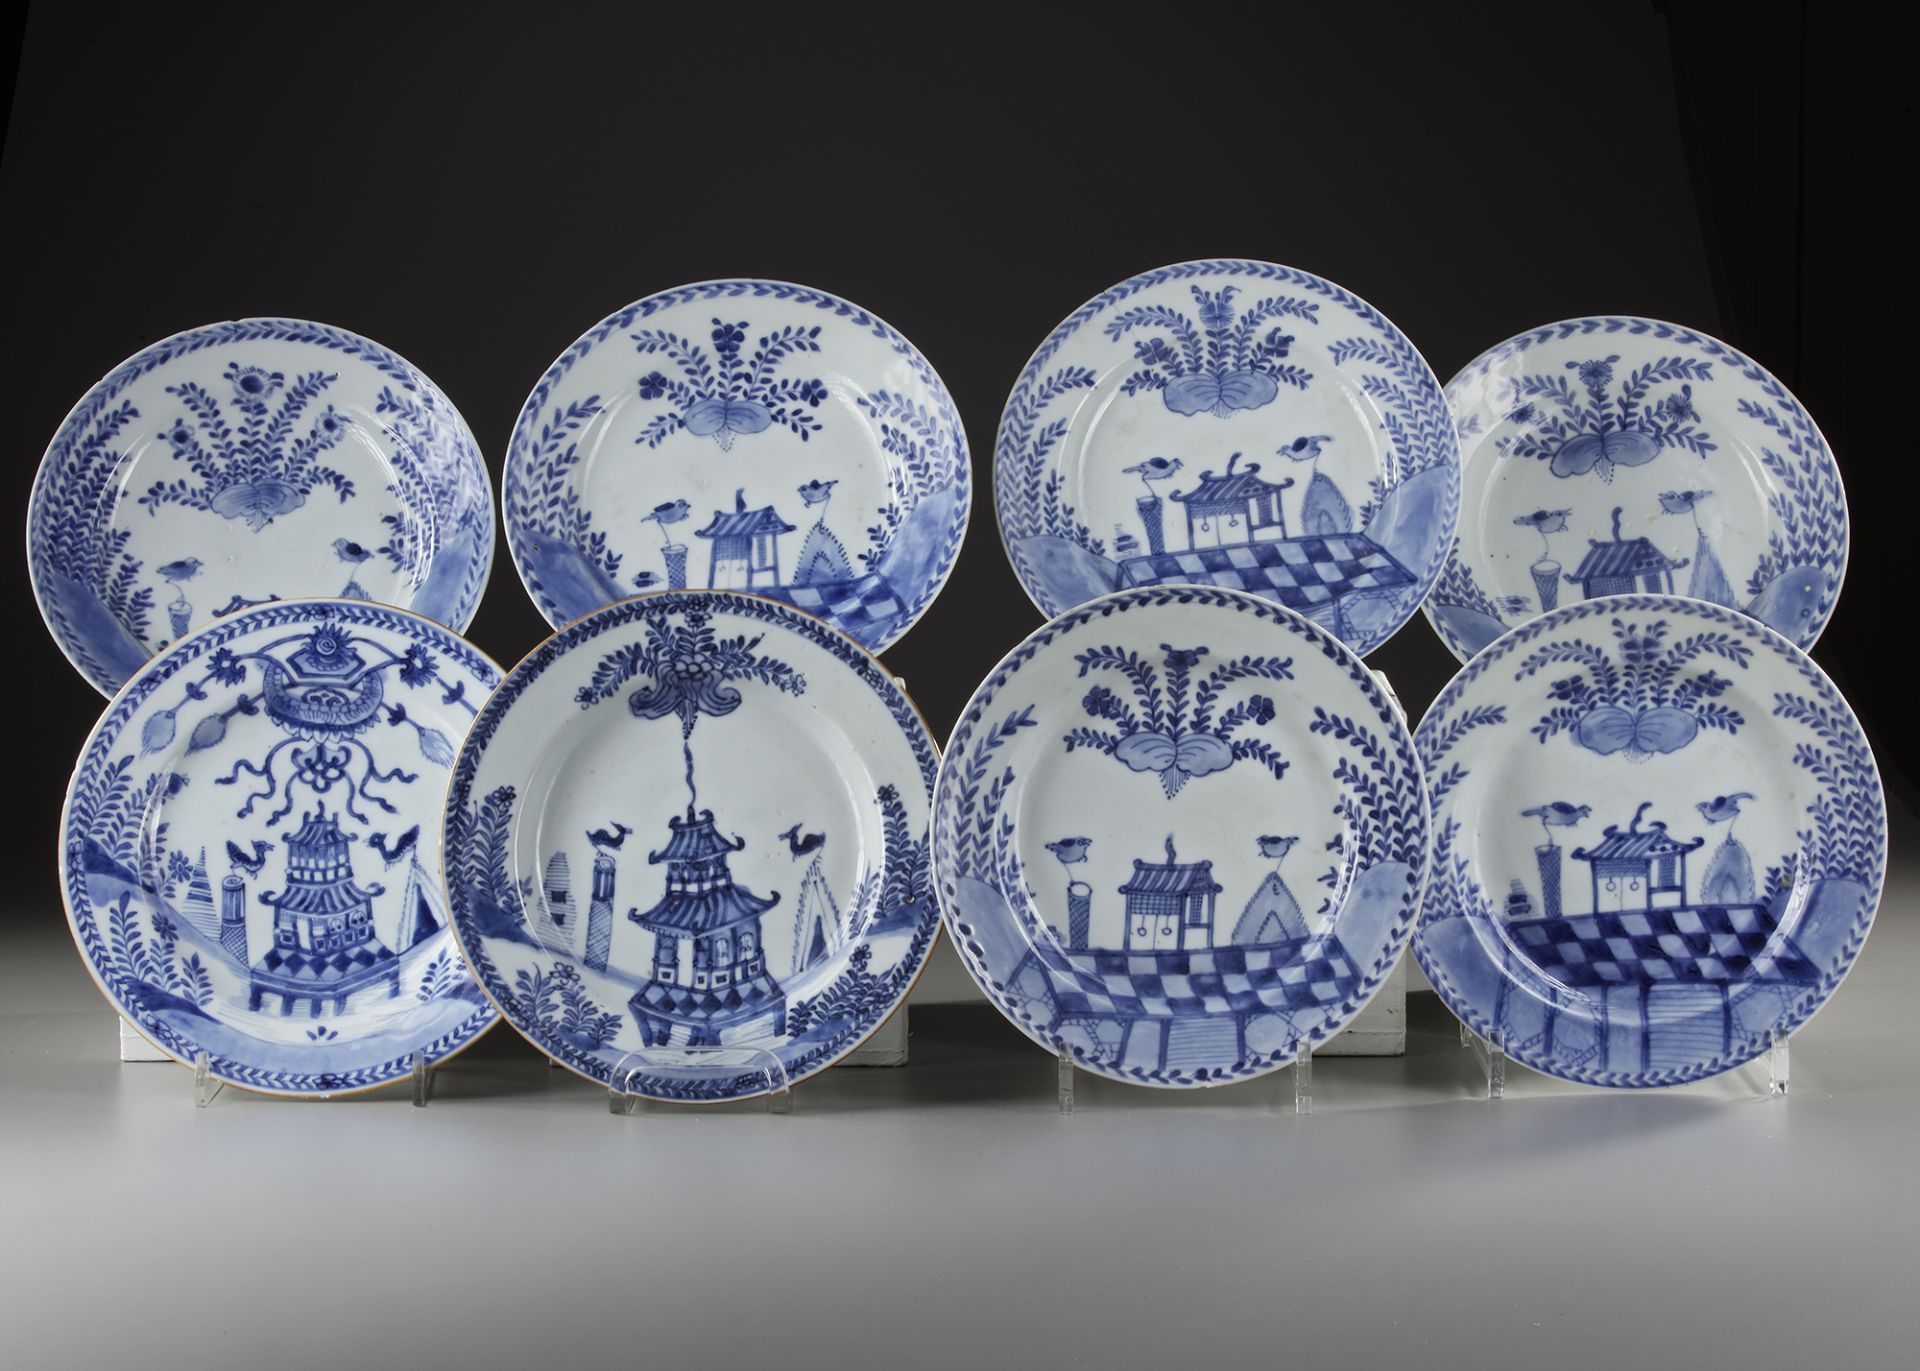 EIGHT CHINESE BLUE AND WHITE 'CUCKOO IN THE HOUSE' DISHES, 18TH CENTURY